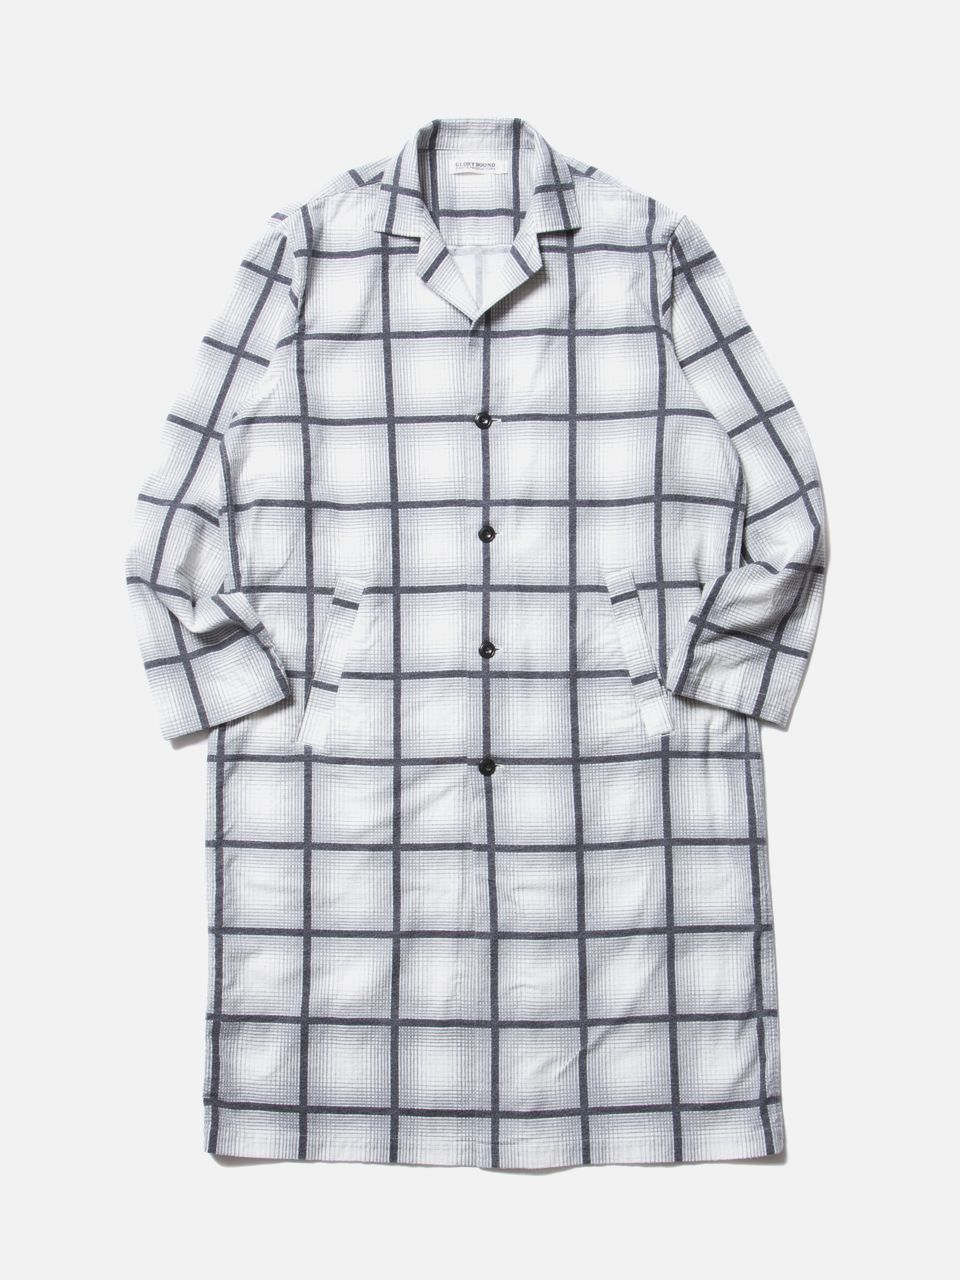 COOTIEの新作Ombre Check Dropped Shoulder Coat入荷